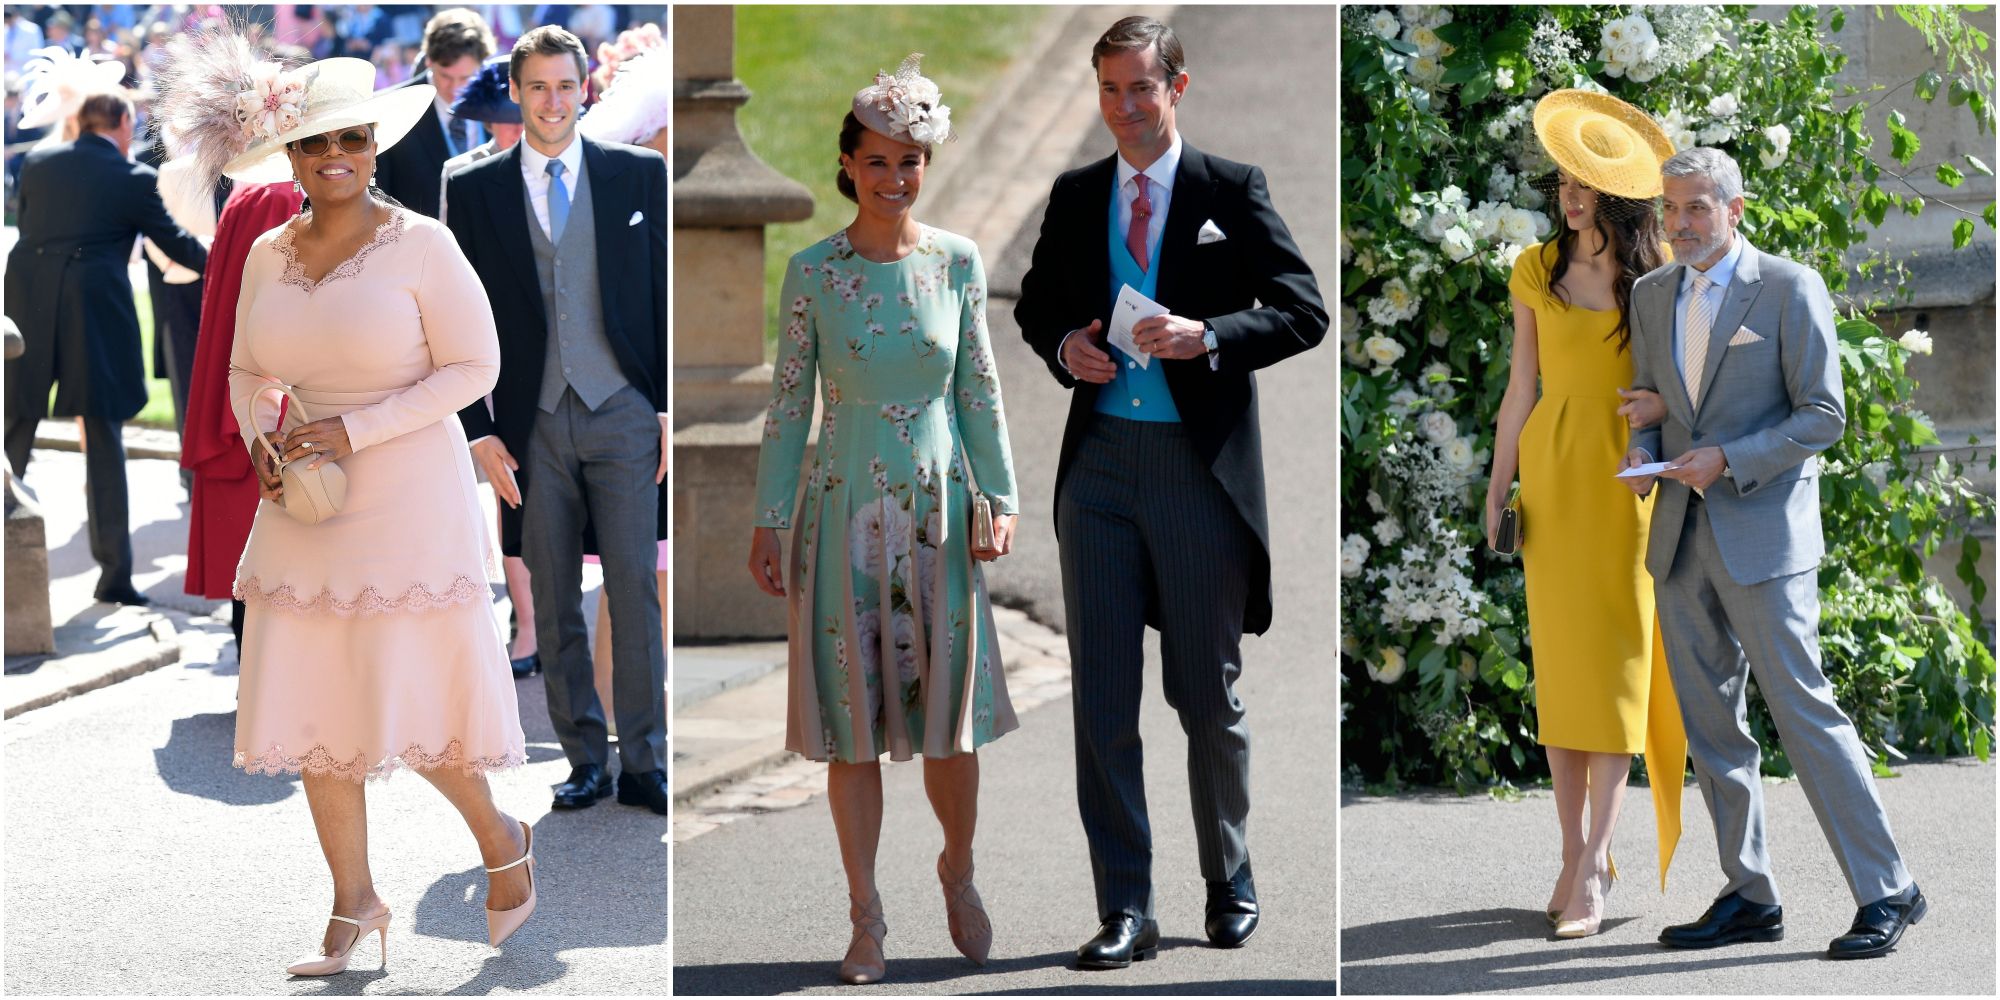 Royal Wedding: Every Stunning Outfit From The A-List Guests